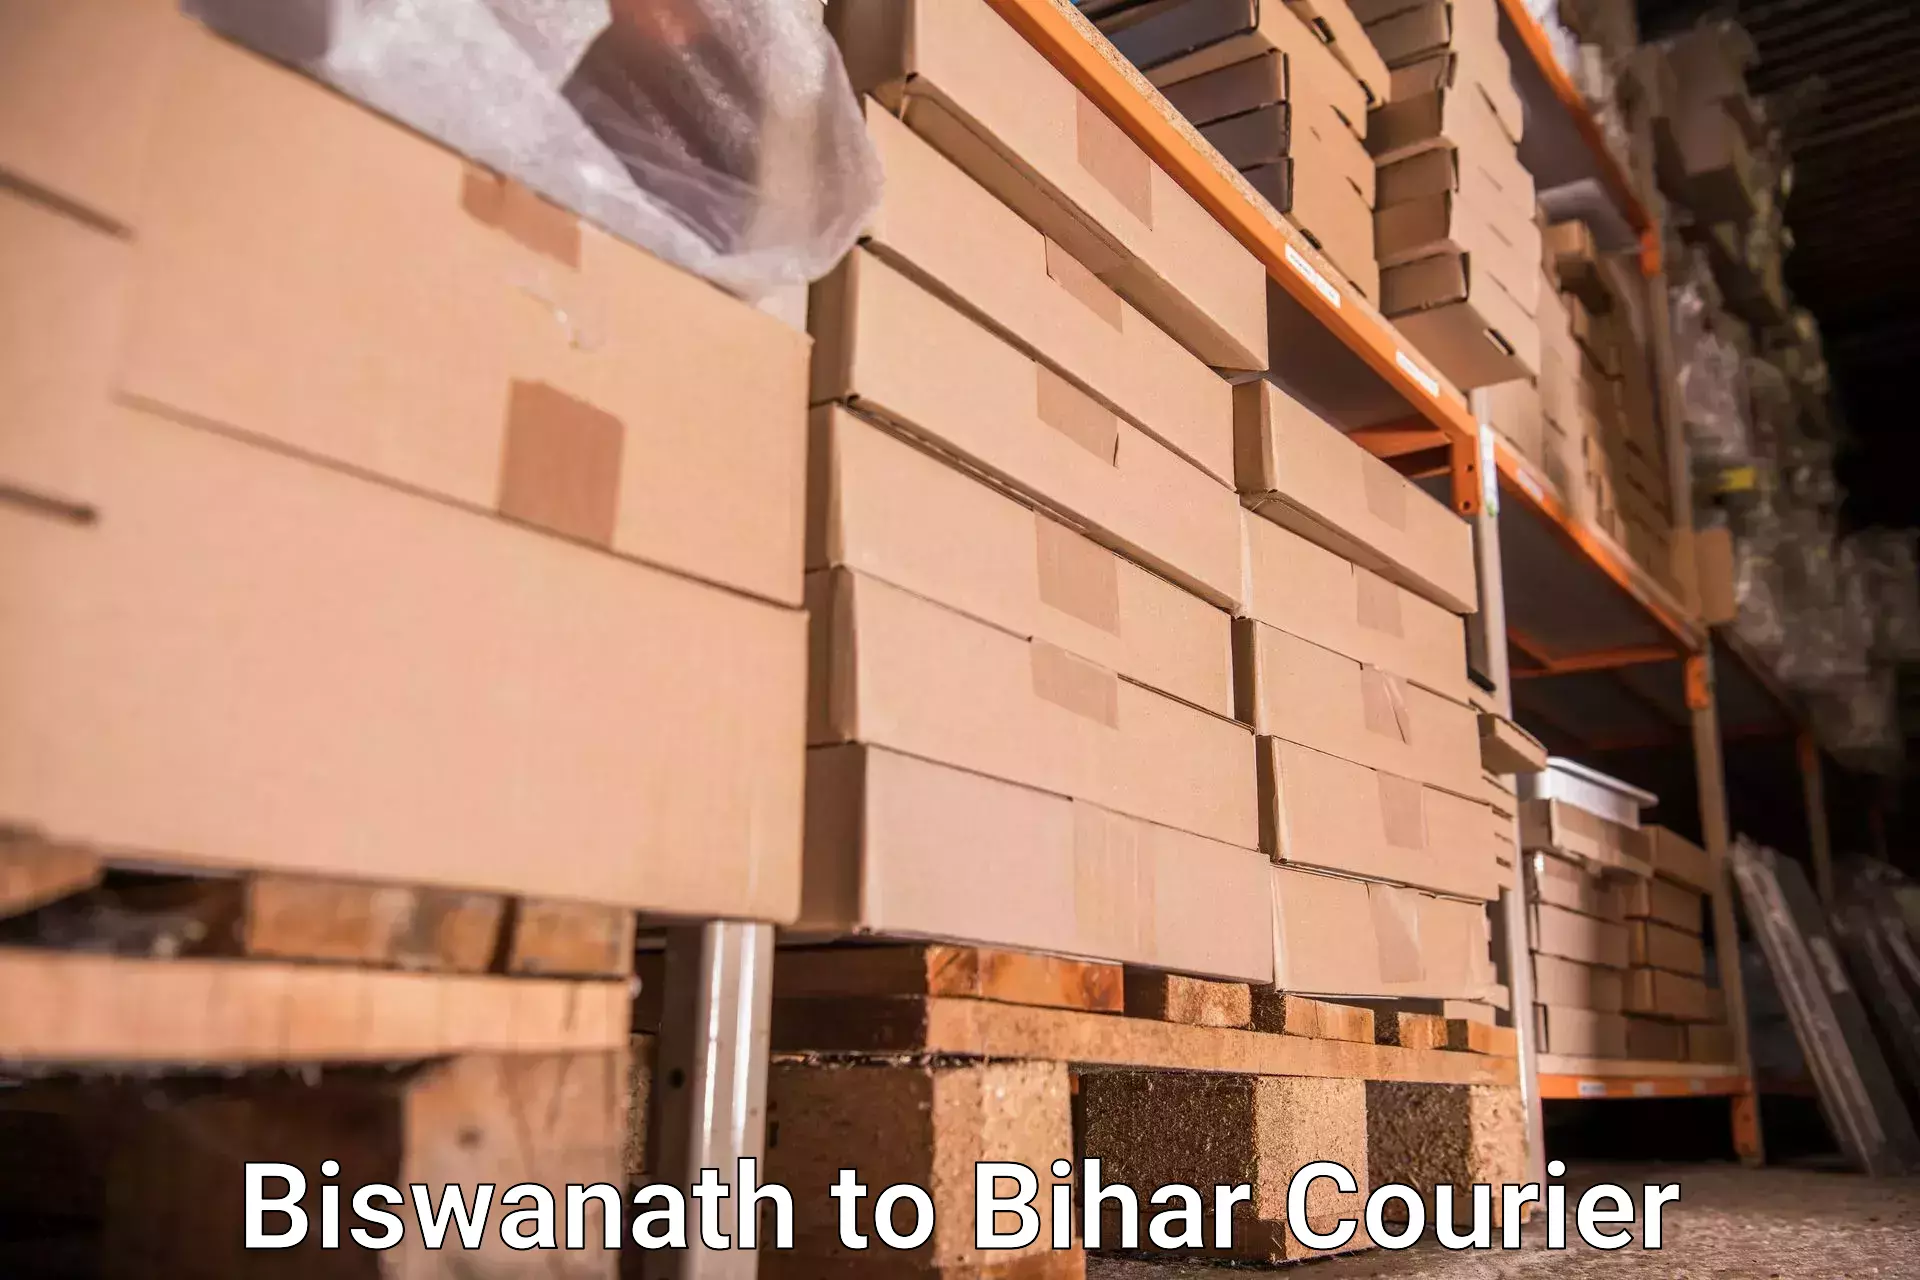 Baggage transport cost Biswanath to Araria